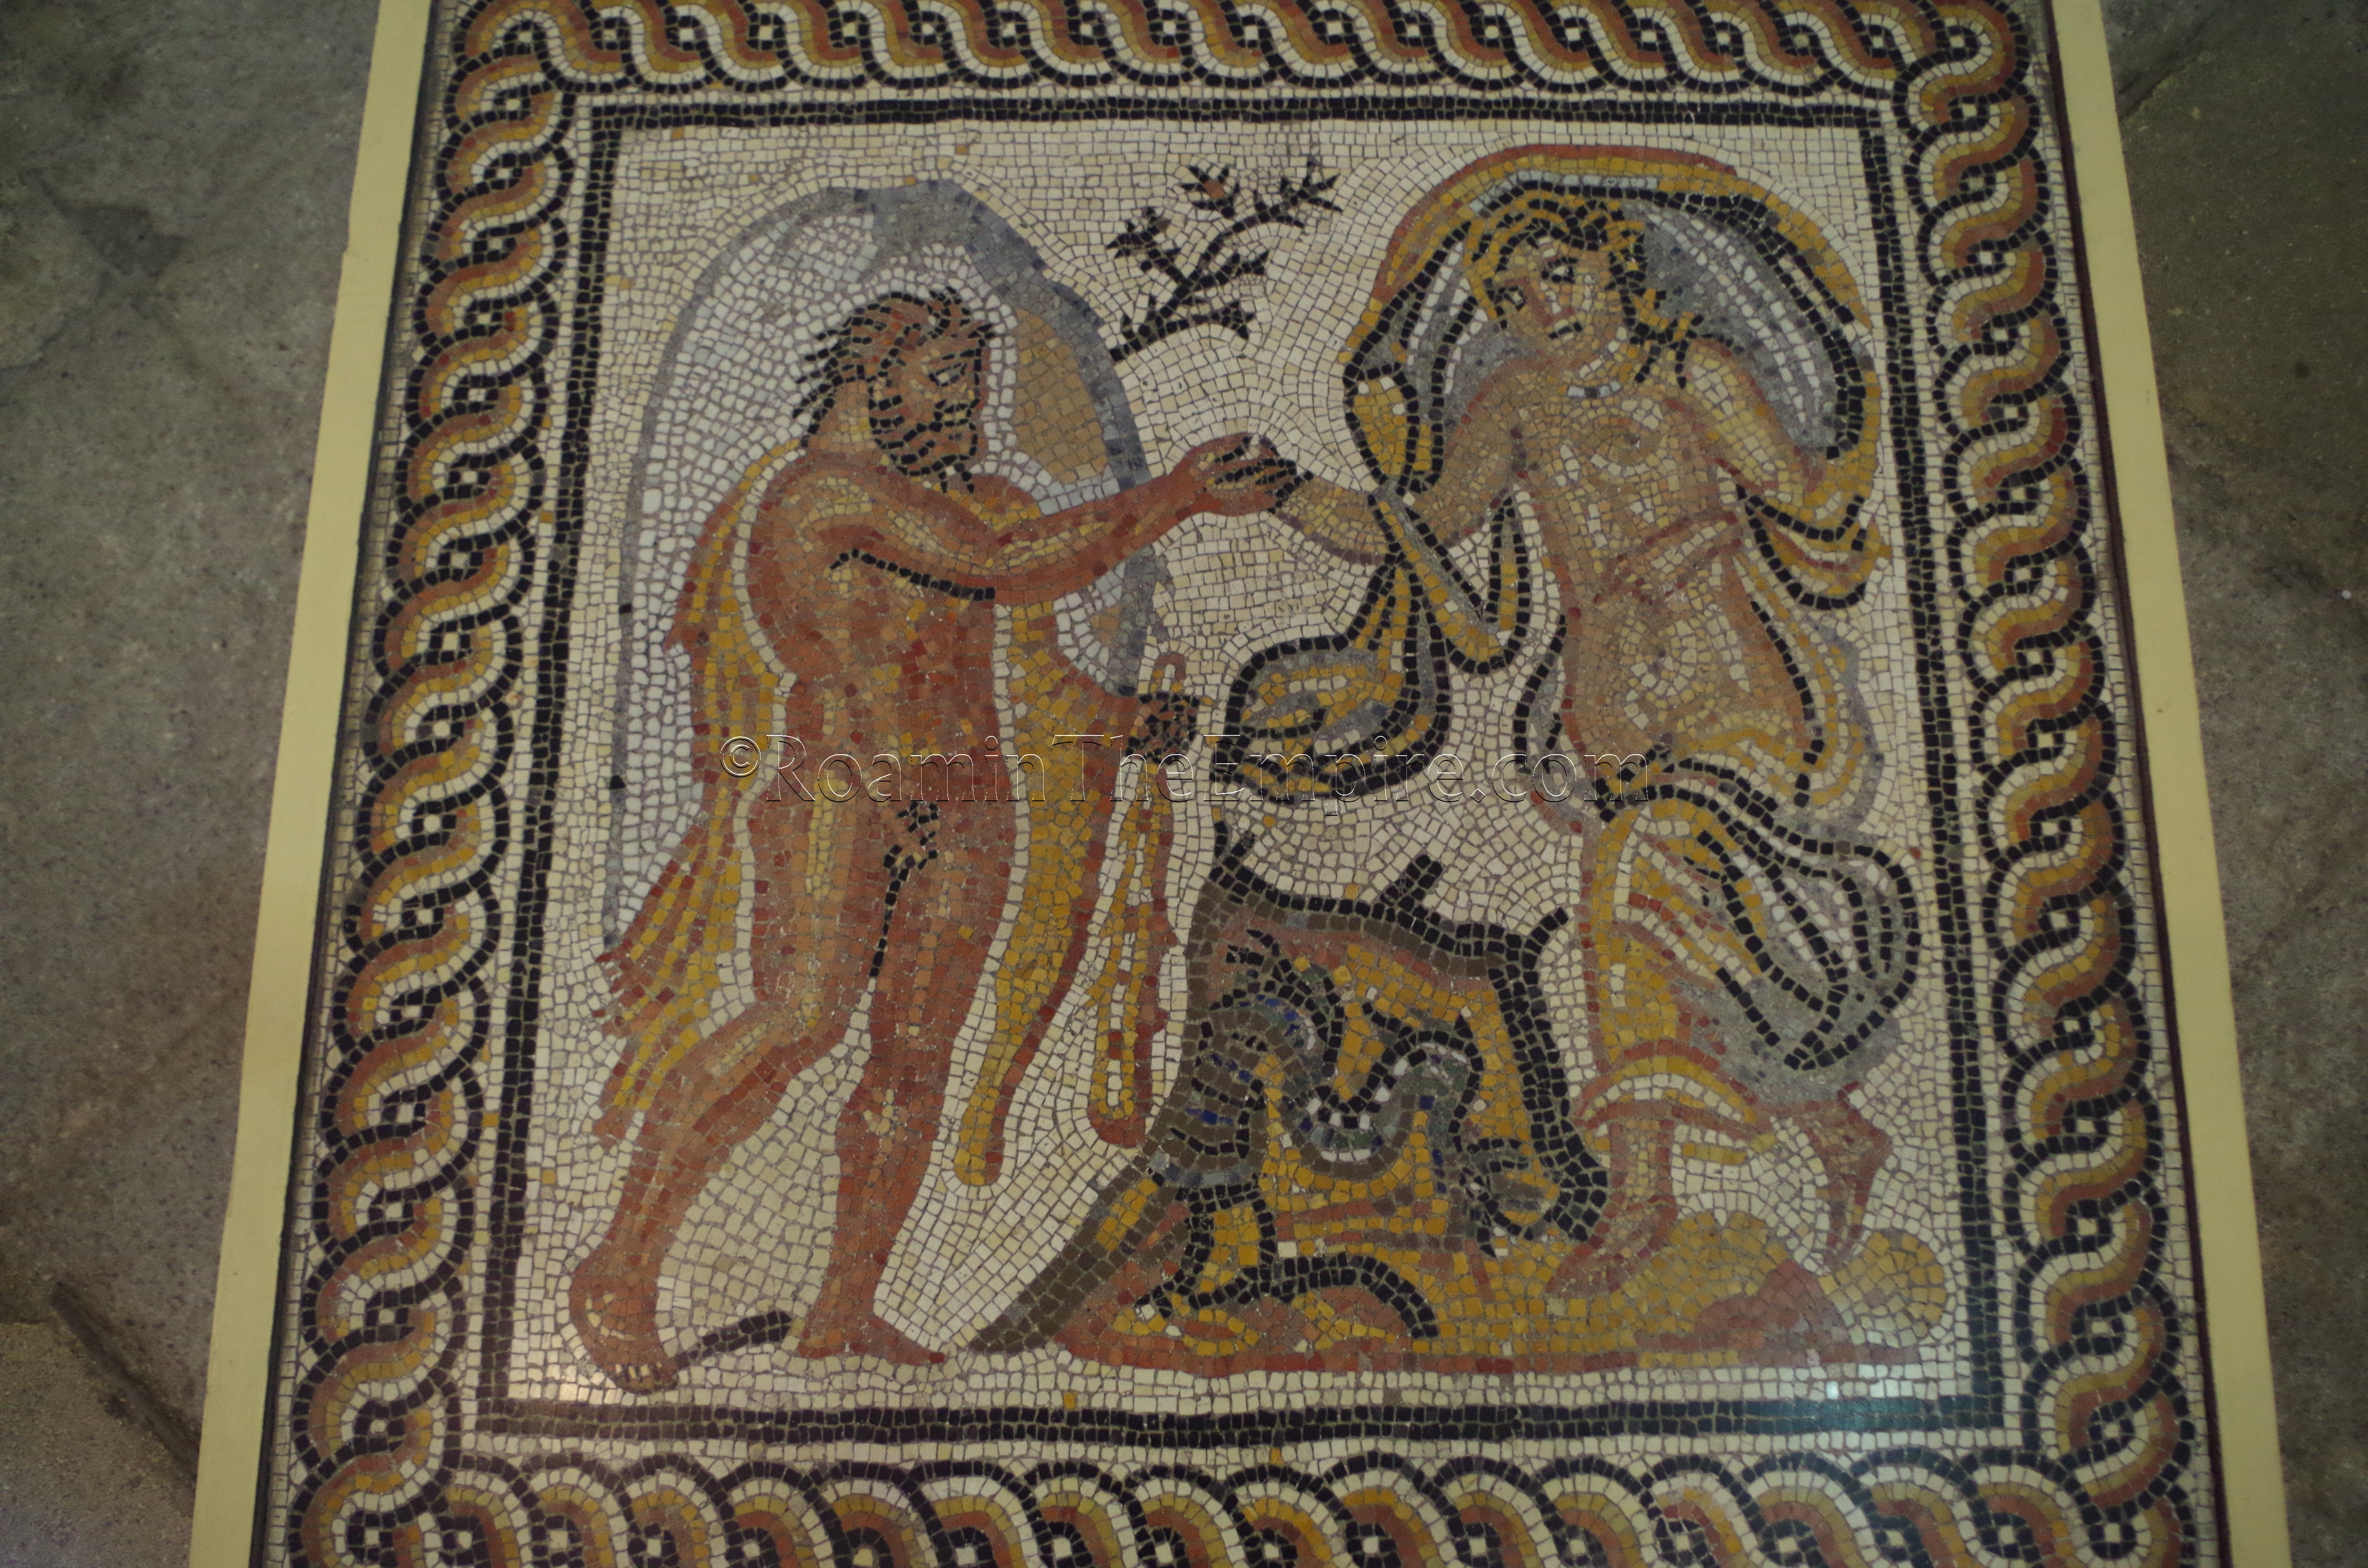 First century CE mosaic depicting Hercules and Hesione. Found in Saint-Paul-Trois-Châteaux and displayed in the Musée Lapidaire. Avennio. Avignon.